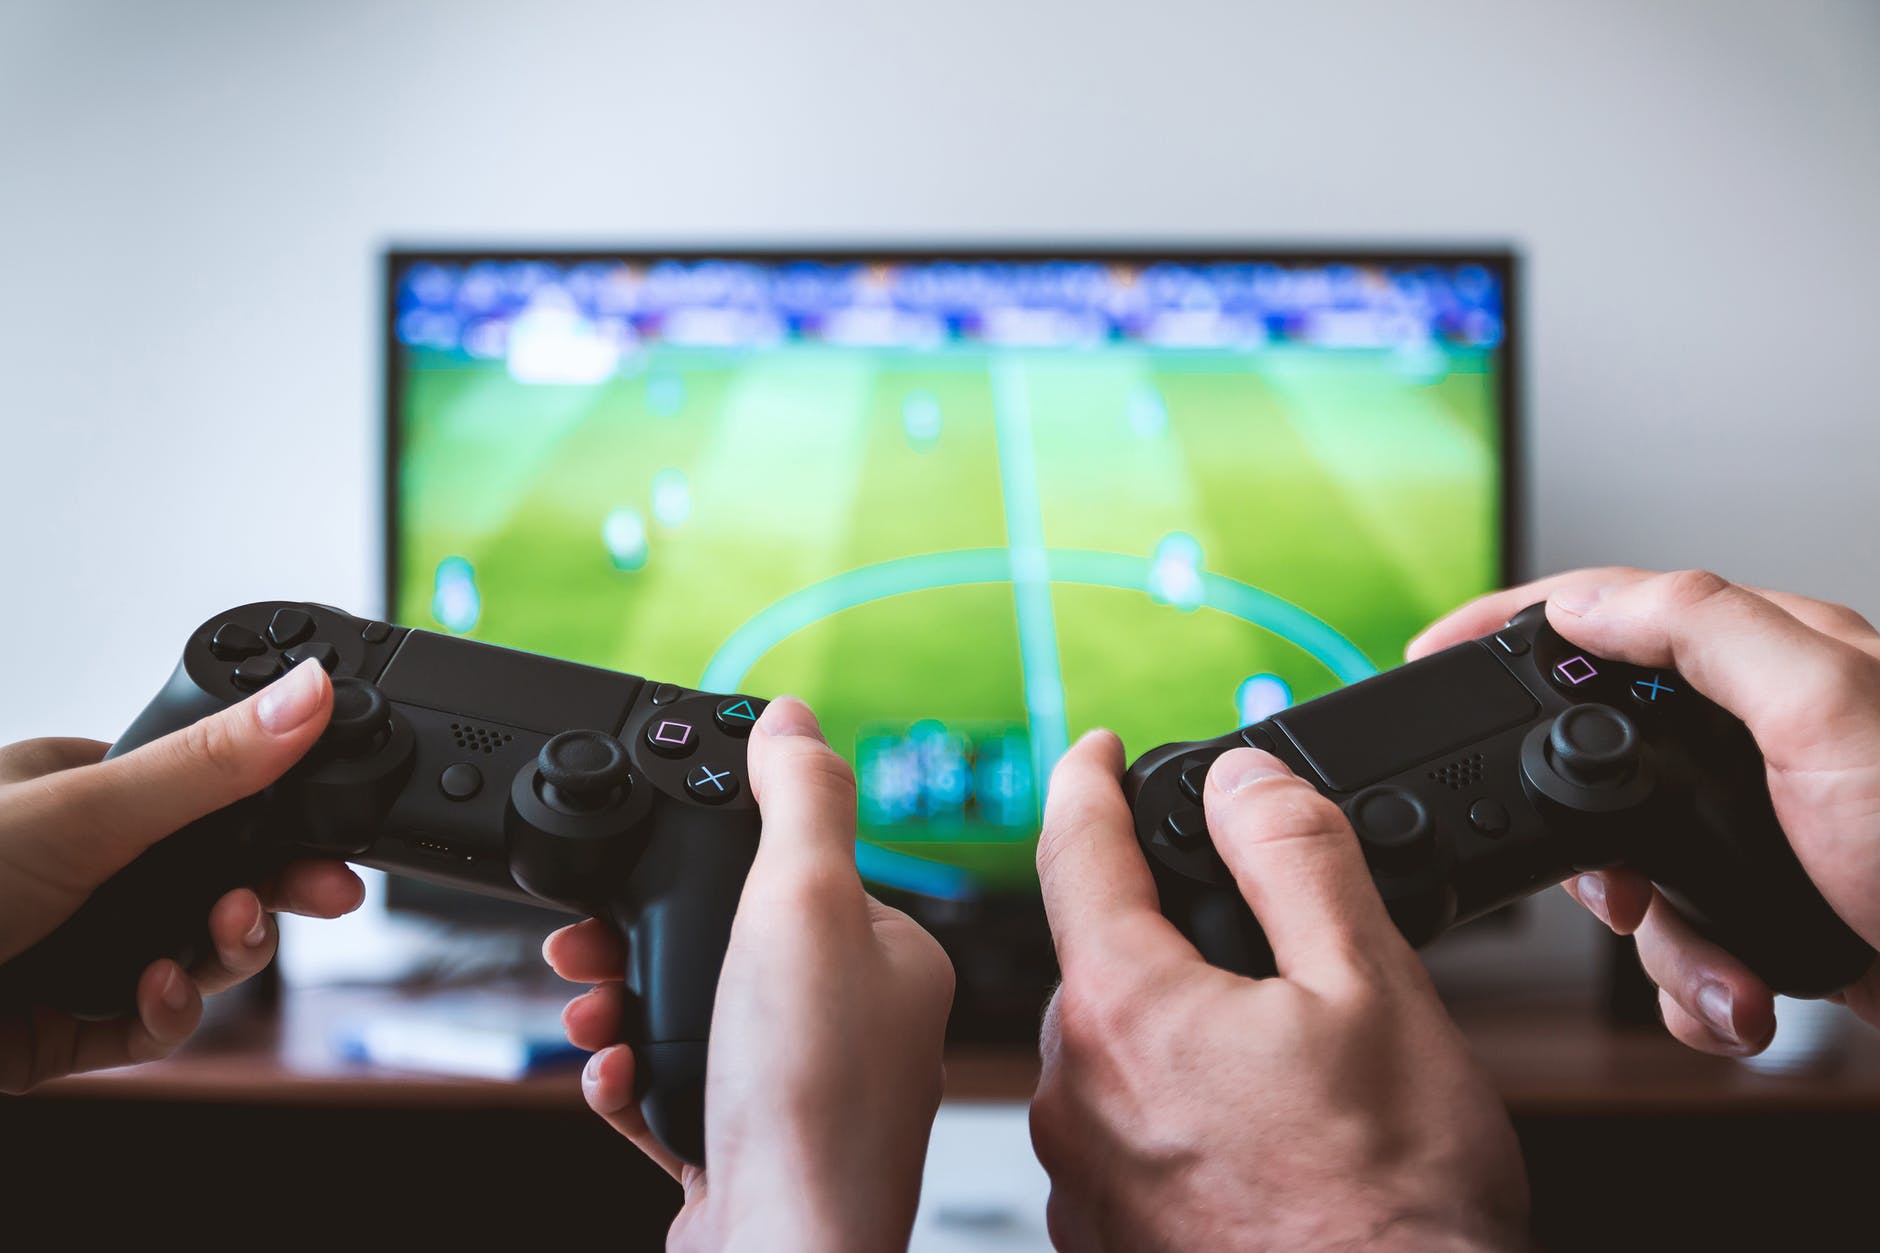 Addiction Of Video Games Listed As Top Mental Health Disorder By WHO